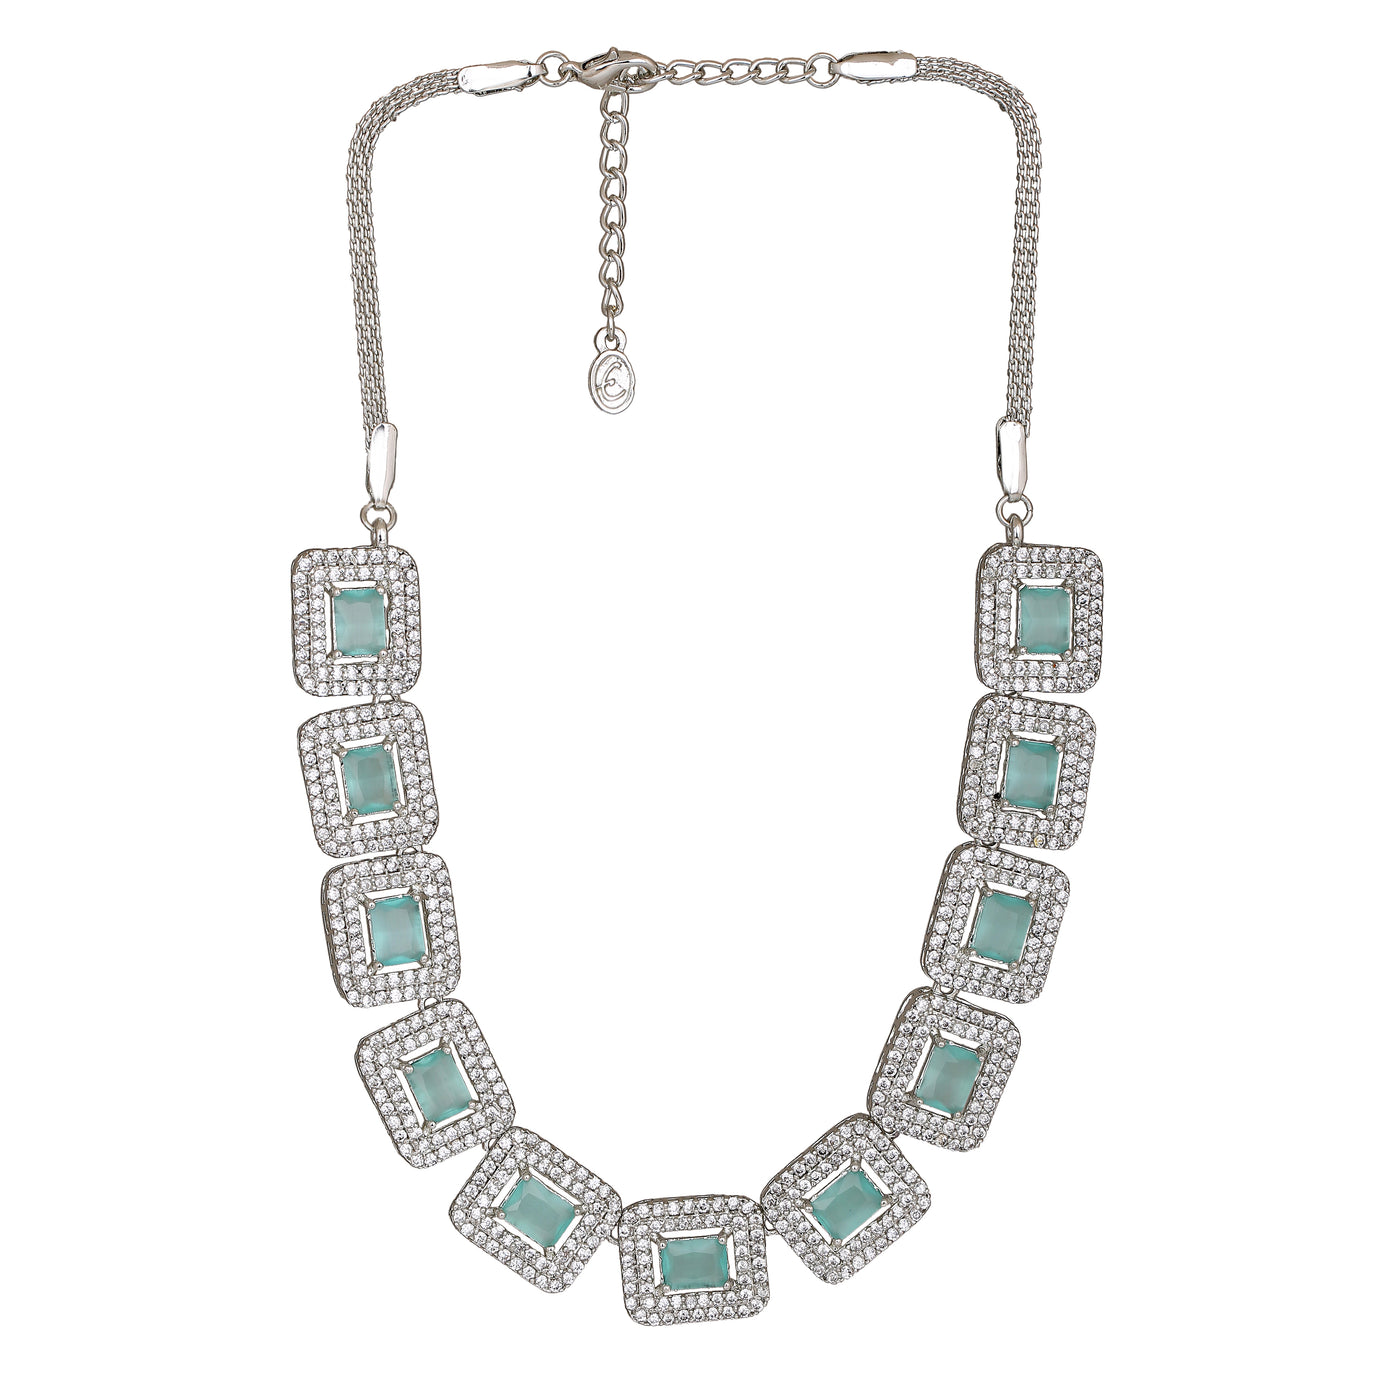 Estele Rhodium Plated CZ Fascinating Necklace Set with Mint Green Crystals for Women